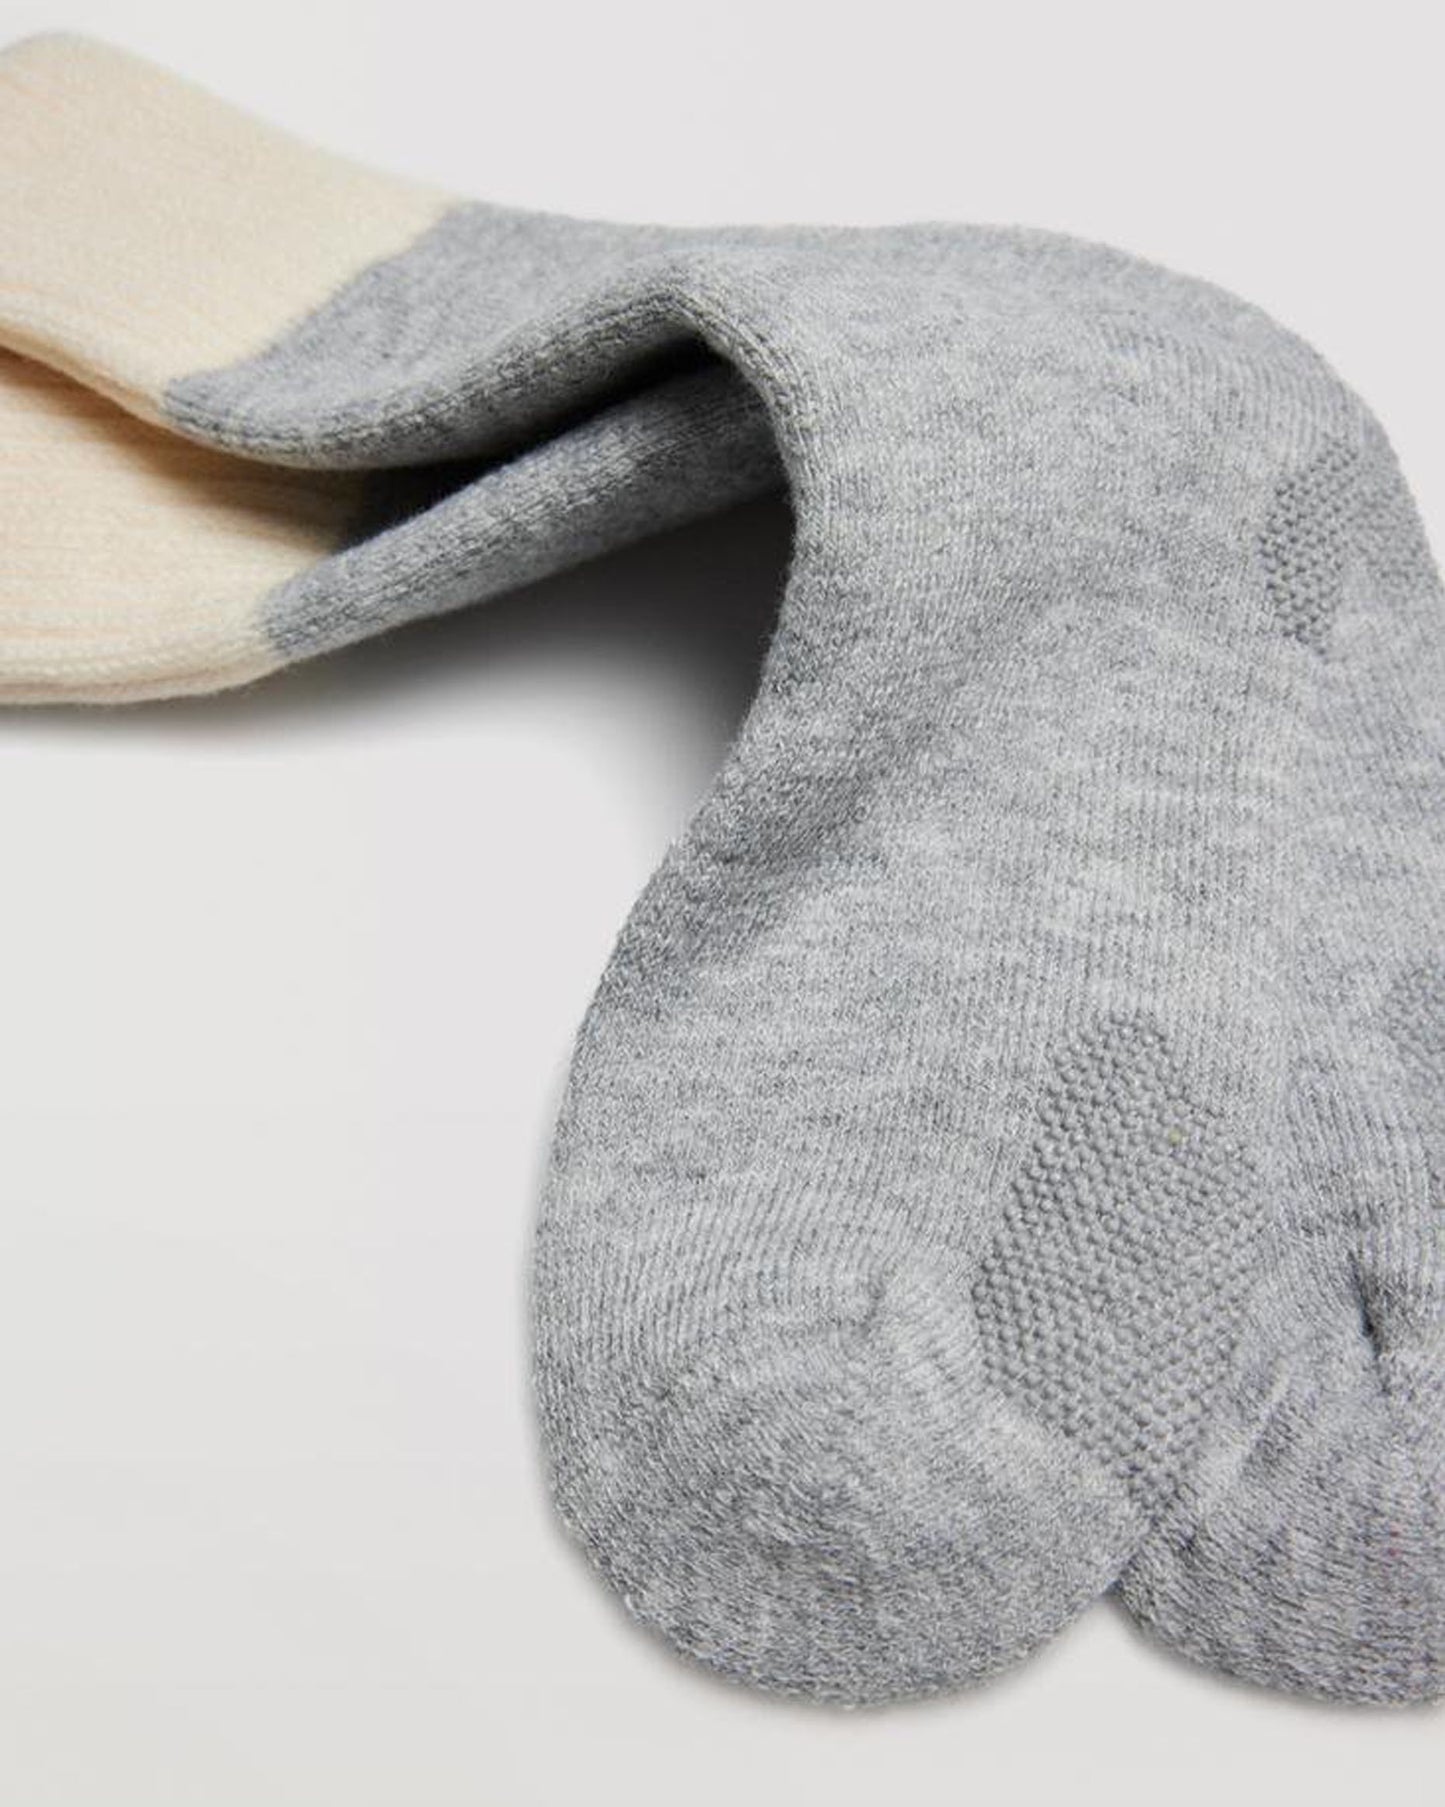 Ysabel Mora 12900 Gripper Socks - Warm light grey slipper socks with a fluffy terry lining and anti-slip gripper on the sole and cream contrasting deep ribbed cuff.